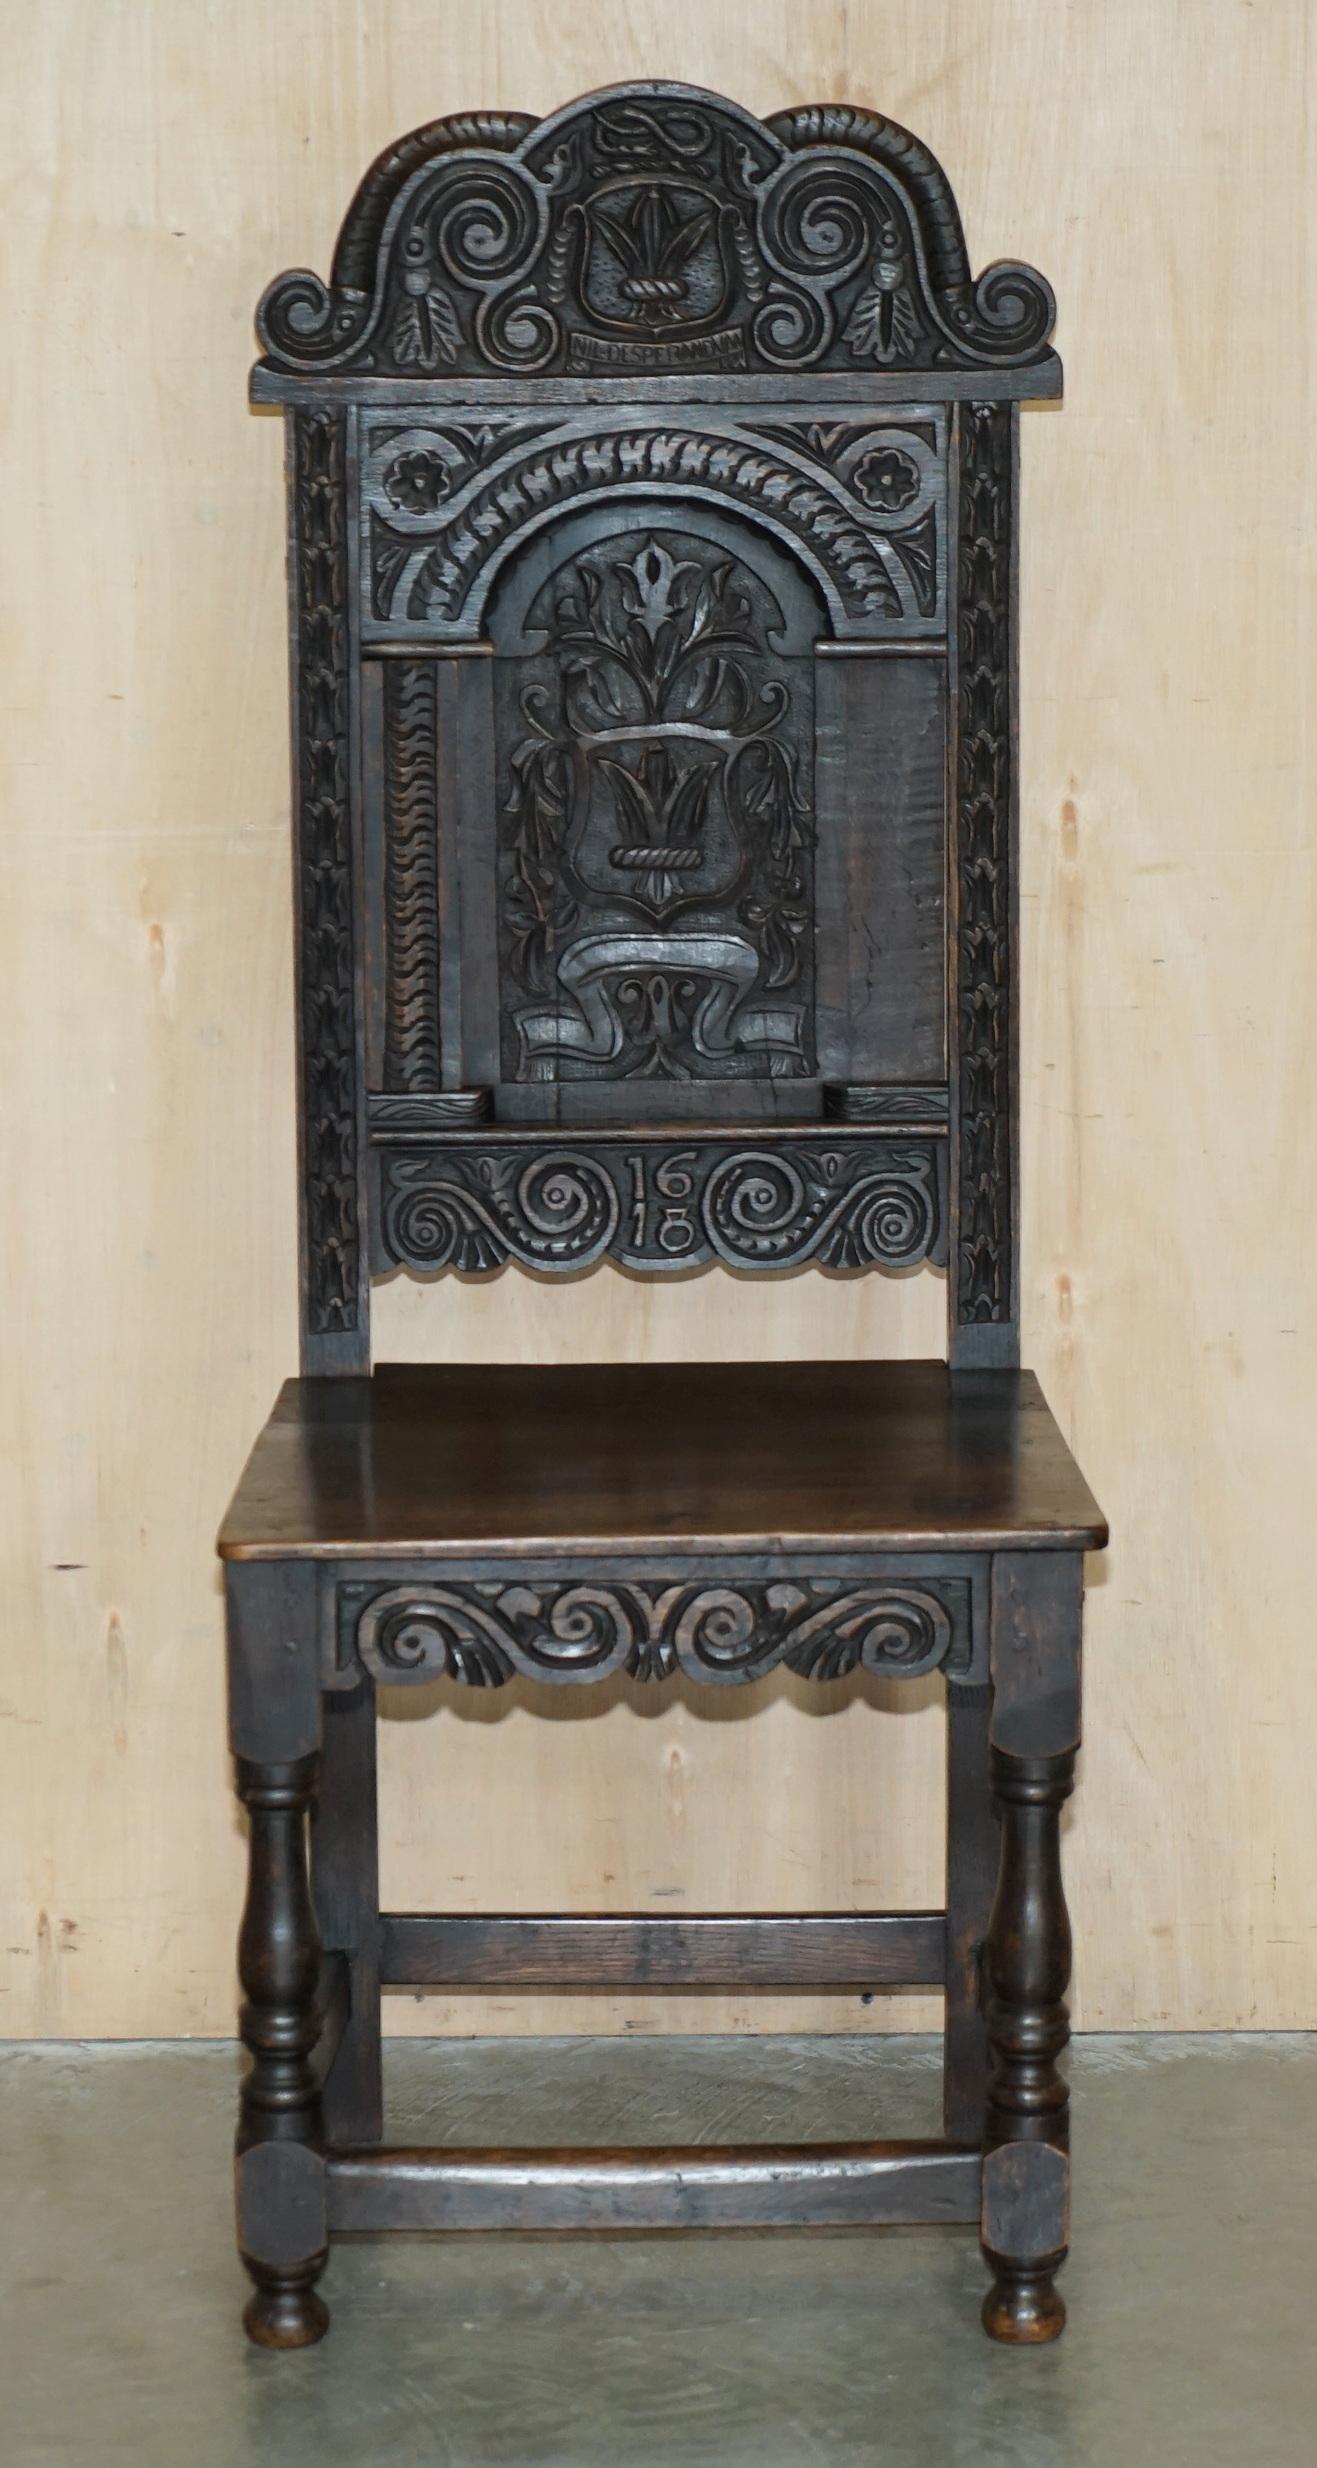 ANTIQUE PAIR OF 17TH CENTURY JACOBEAN ENGLISH OAK CHAIRS FROM THE FILM HELLBOy For Sale 8